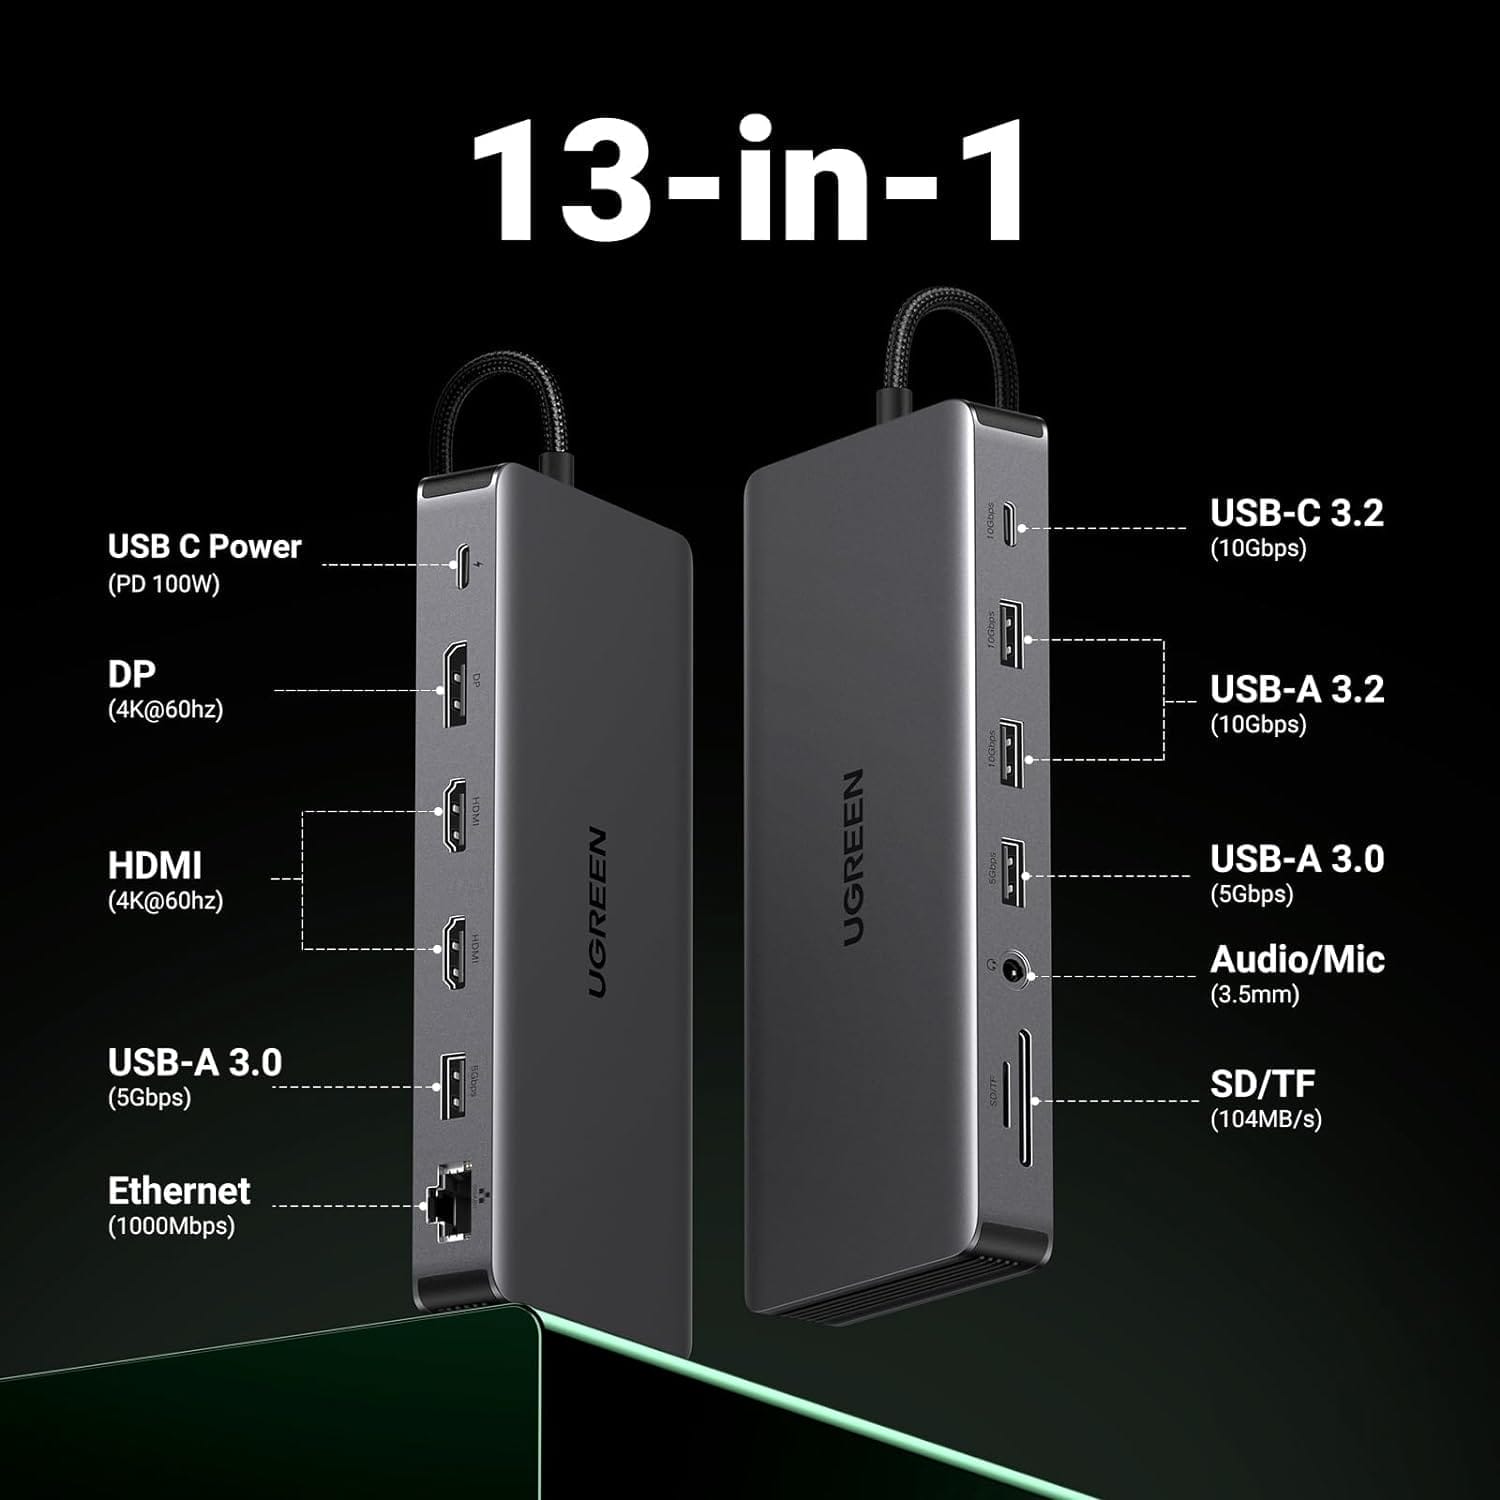 Image shows the ports of the UGREEN Revodok Pro 313.